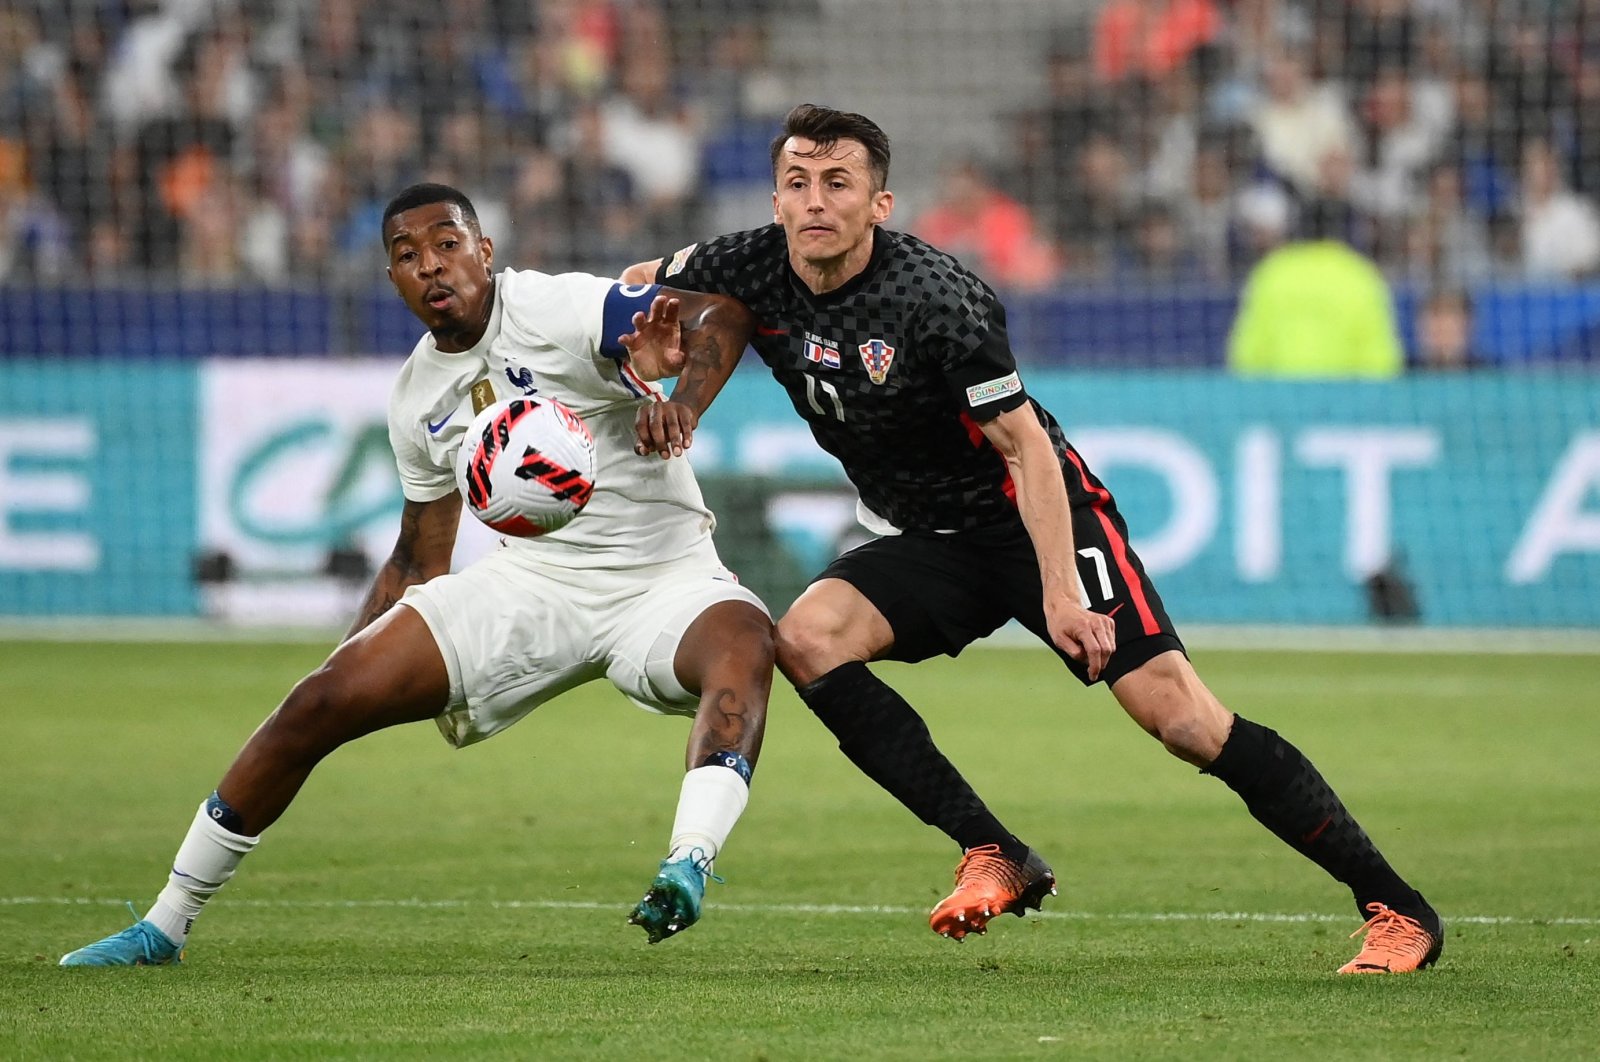 France defender Presnel Kimpembe (L) fights for the ball with Croatia forward Ante Budimir (R) in a UEFA Nations League match, Paris, France, June 13, 2022. (AFP Photo)